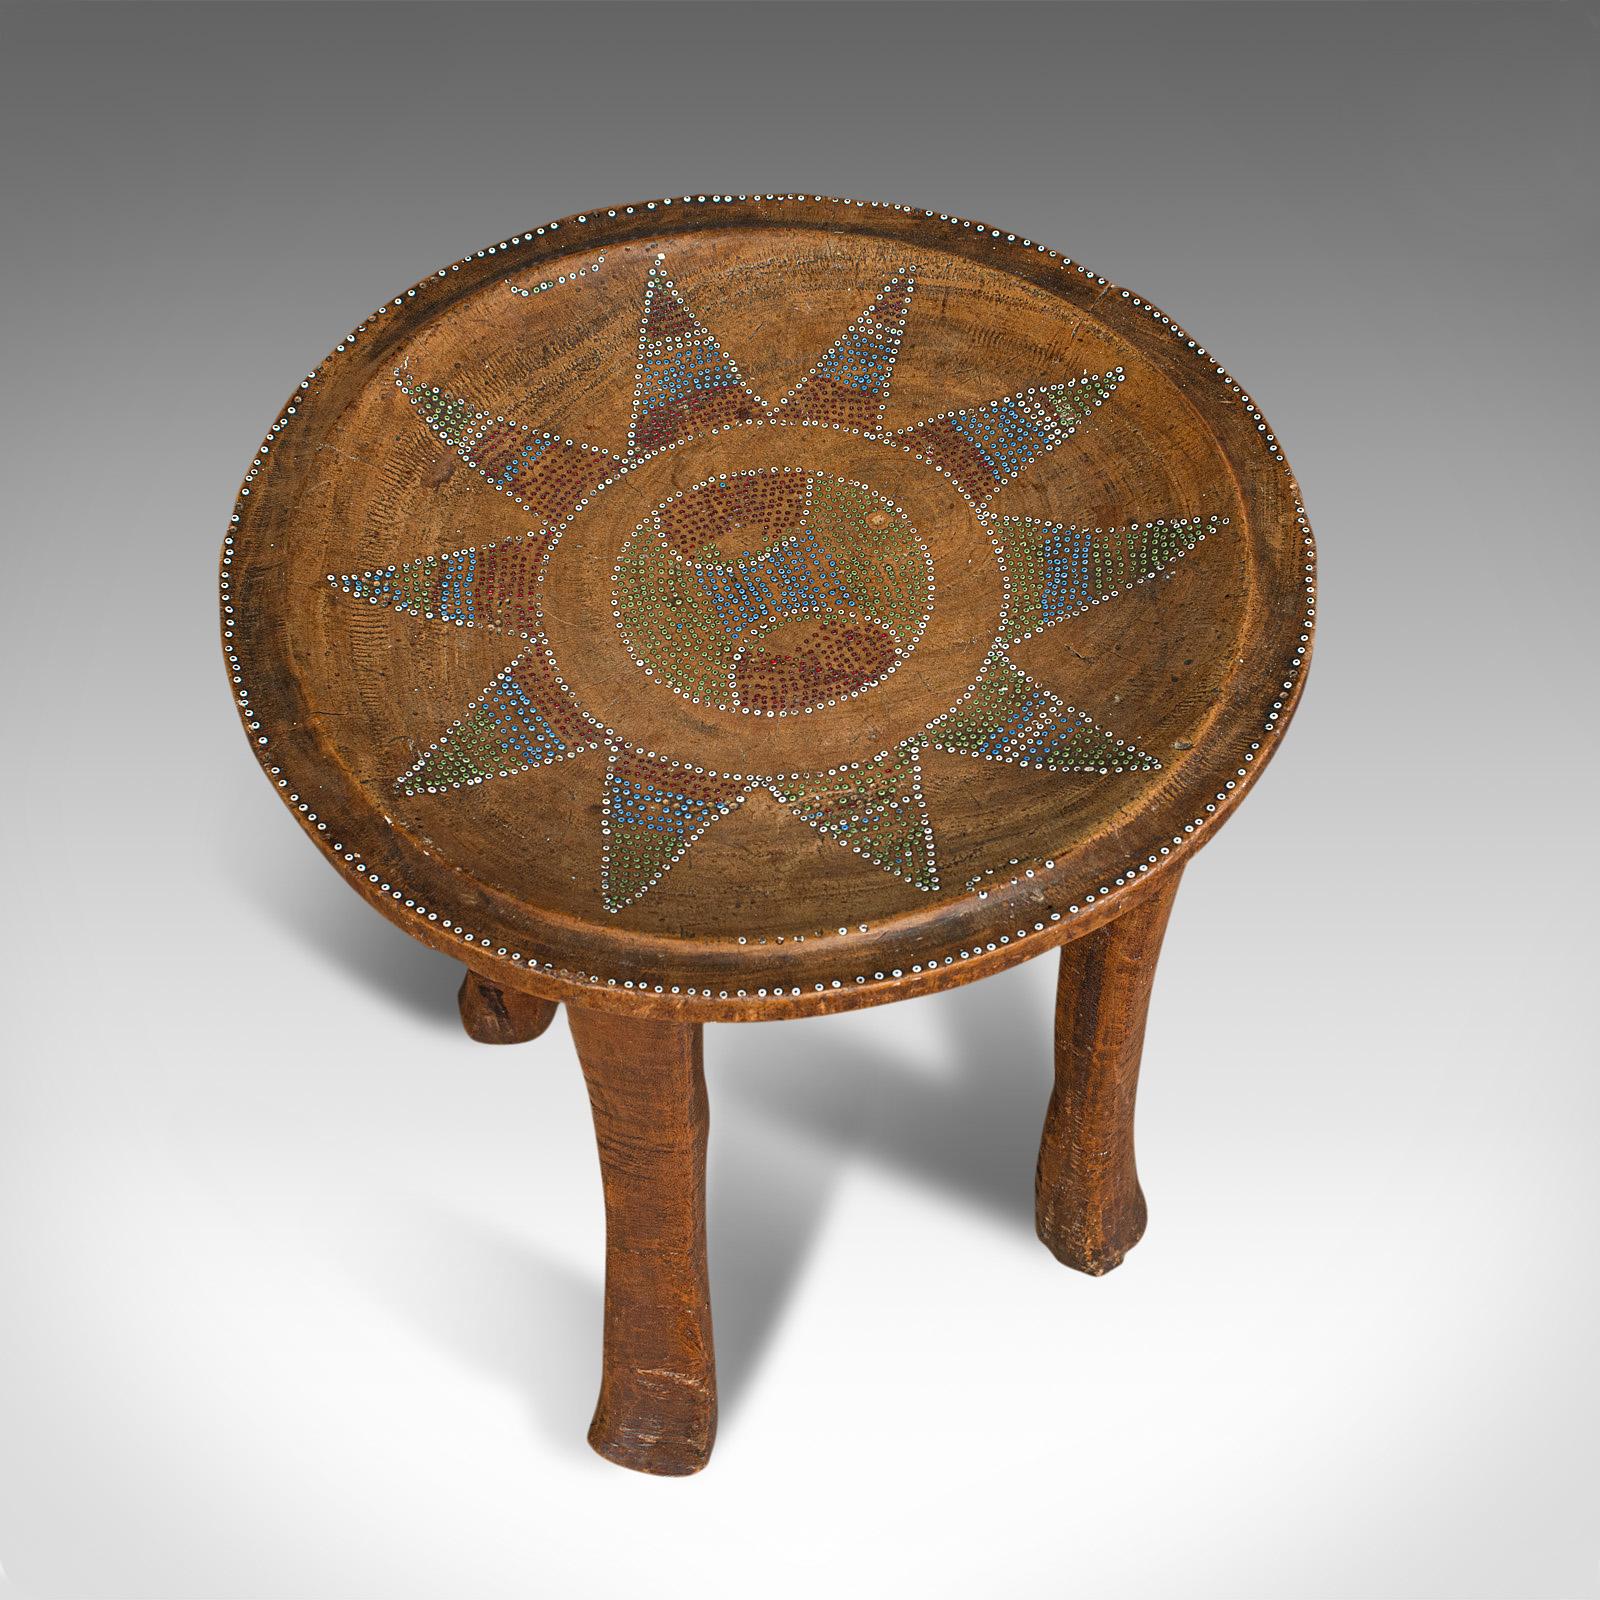 Fruitwood Small Antique Tribal Side Table, Australian, Lamp, Stool, Late Victorian, C.1900